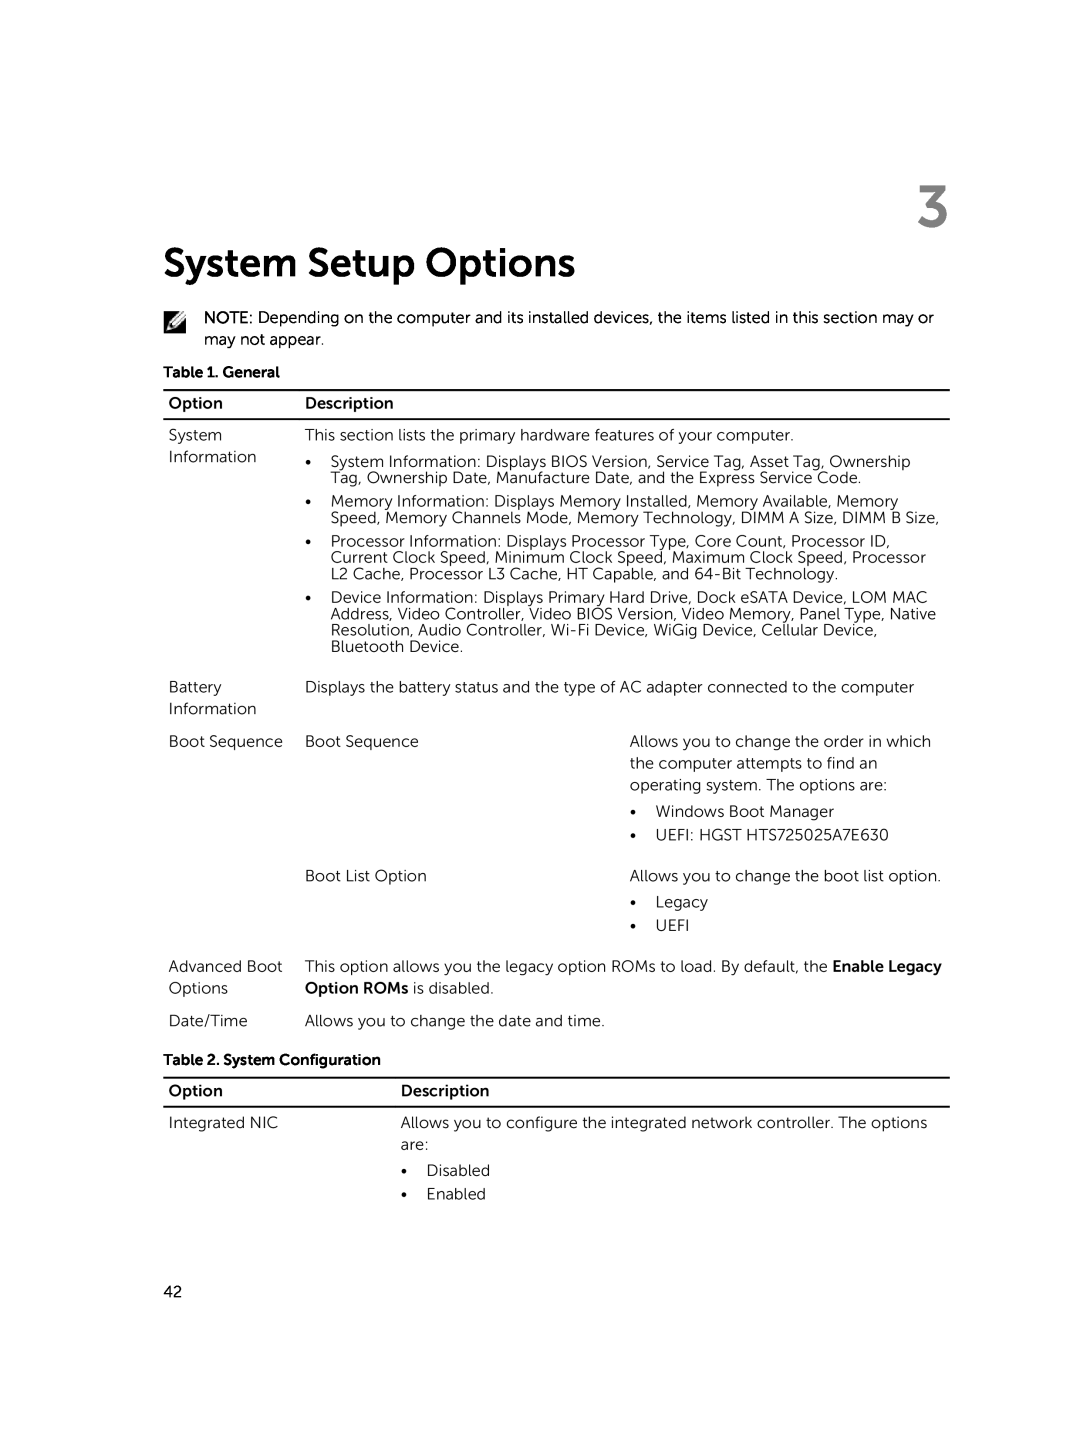 Dell E5450 owner manual System Setup Options, General, System Configuration 